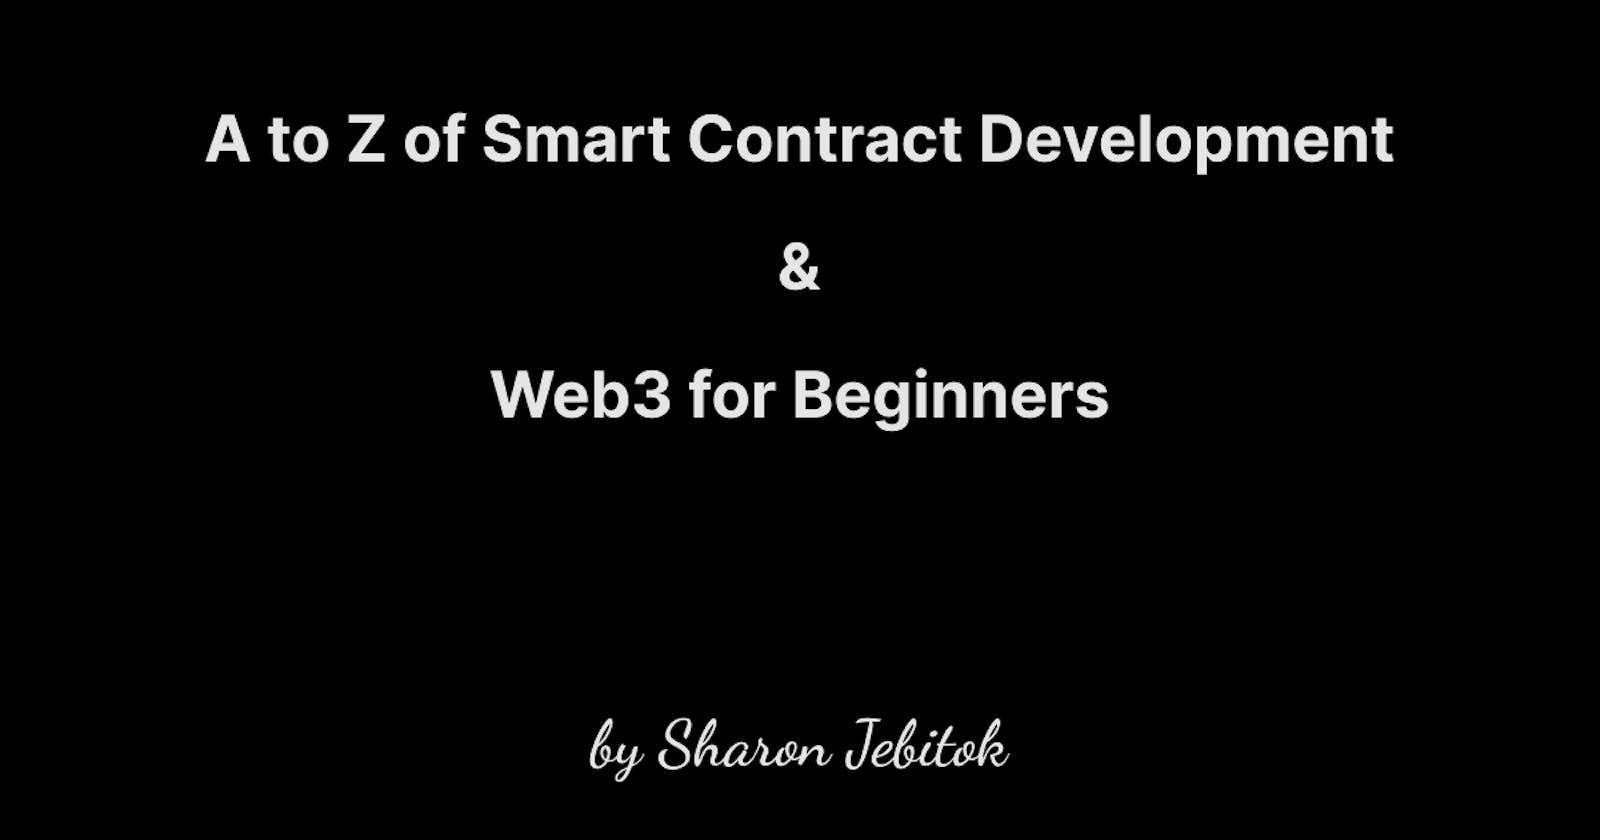 A to Z of Smart Contract Development and Web3 for Beginners